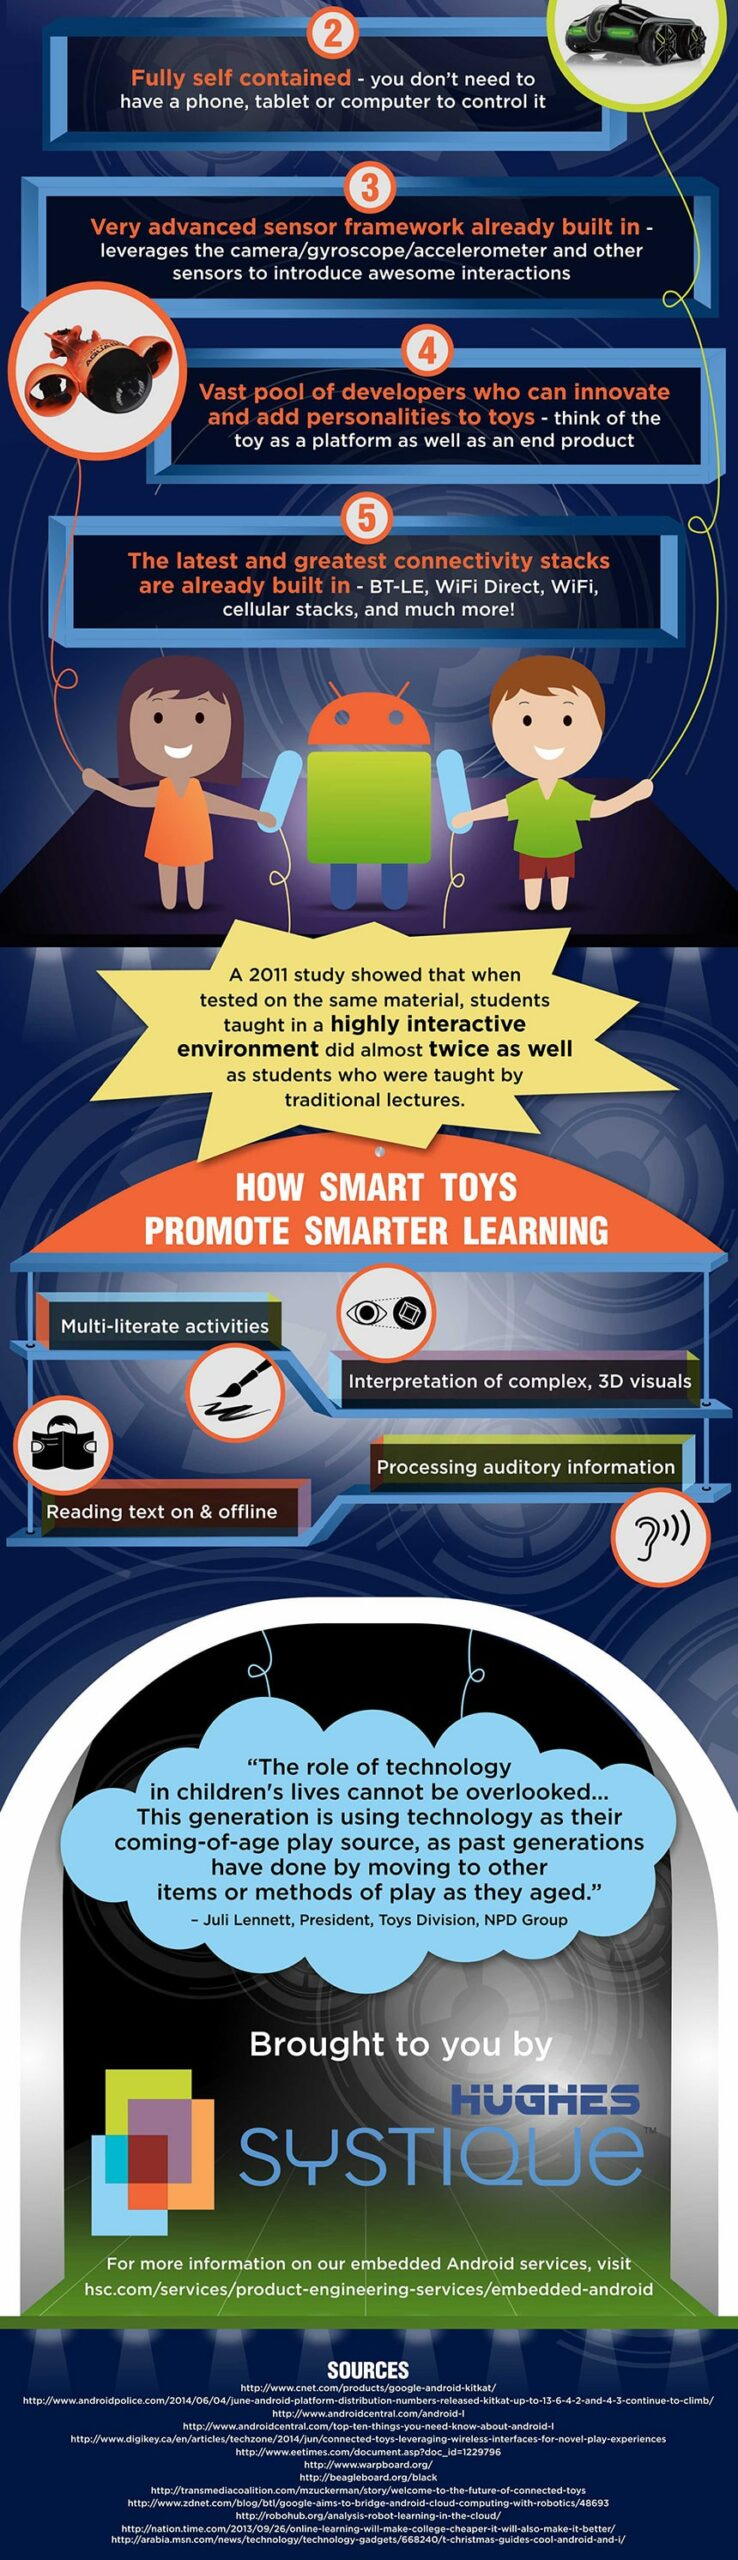 Smart Toys: How Android Is Transforming The Way We Play & Learn